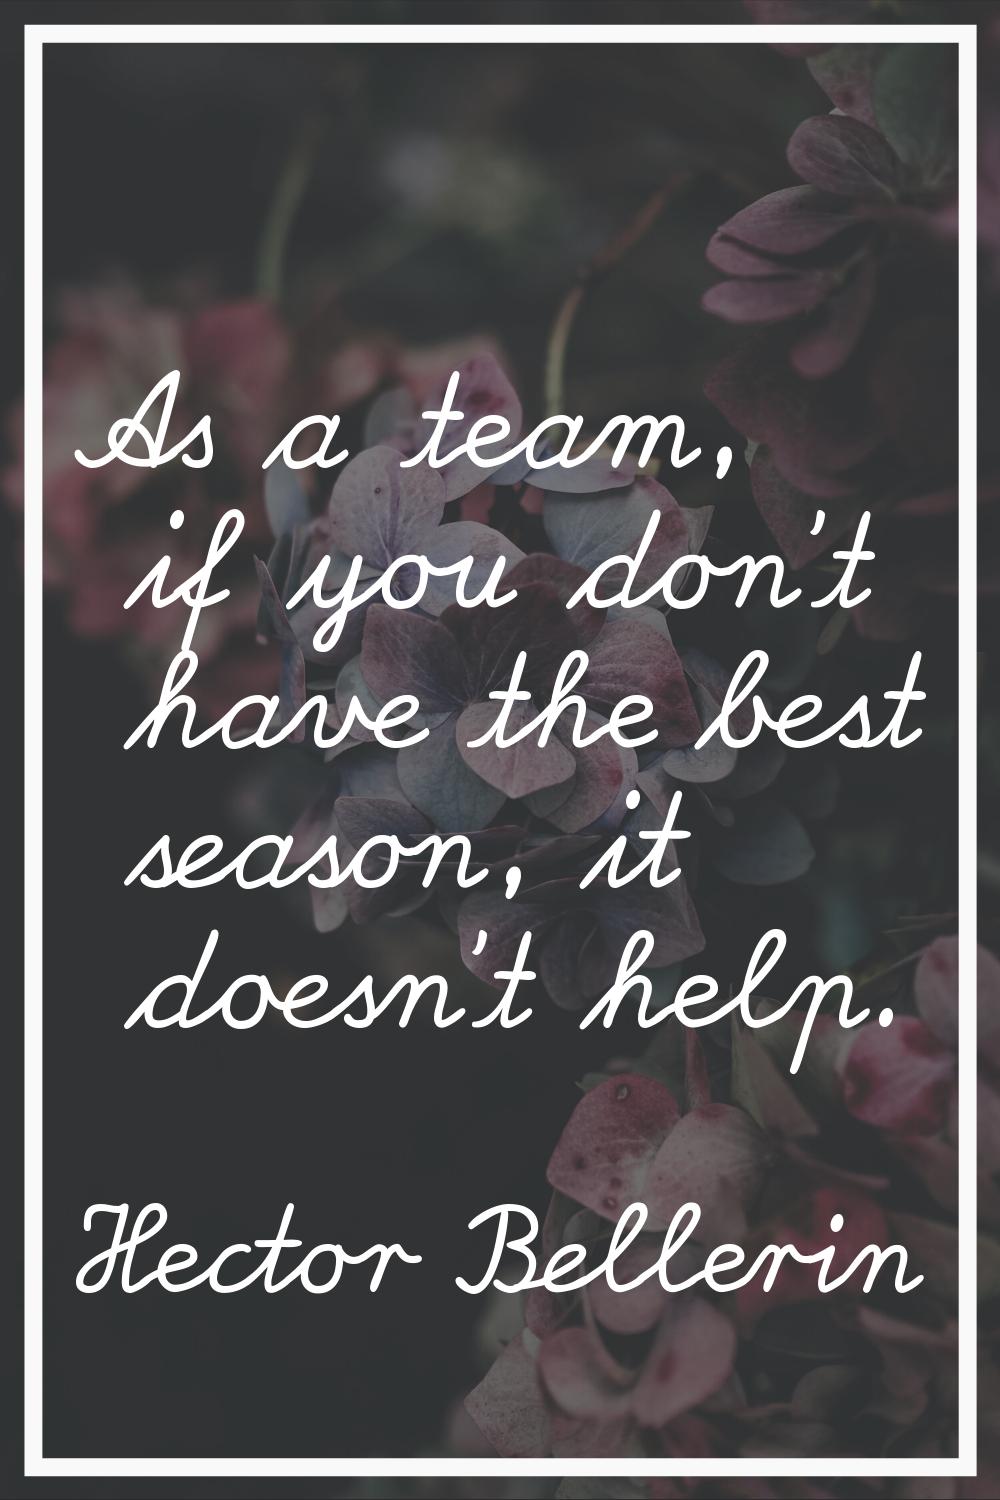 As a team, if you don't have the best season, it doesn't help.